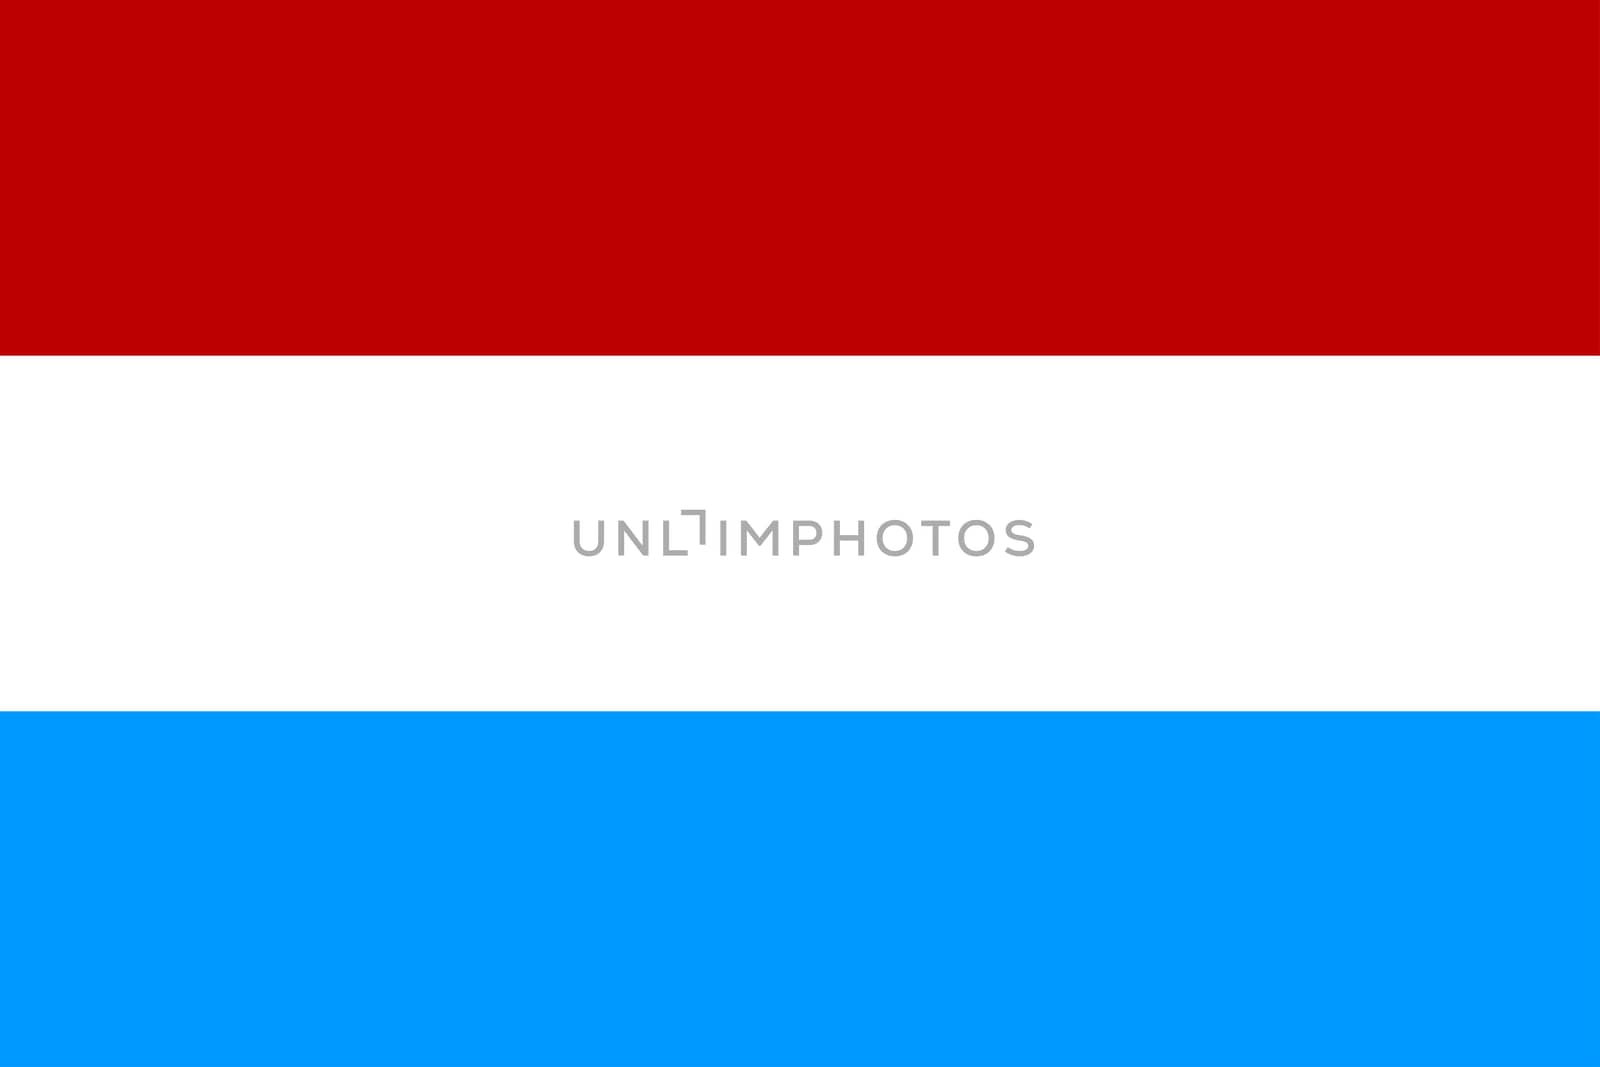 Flag of Luxembourg by peromarketing